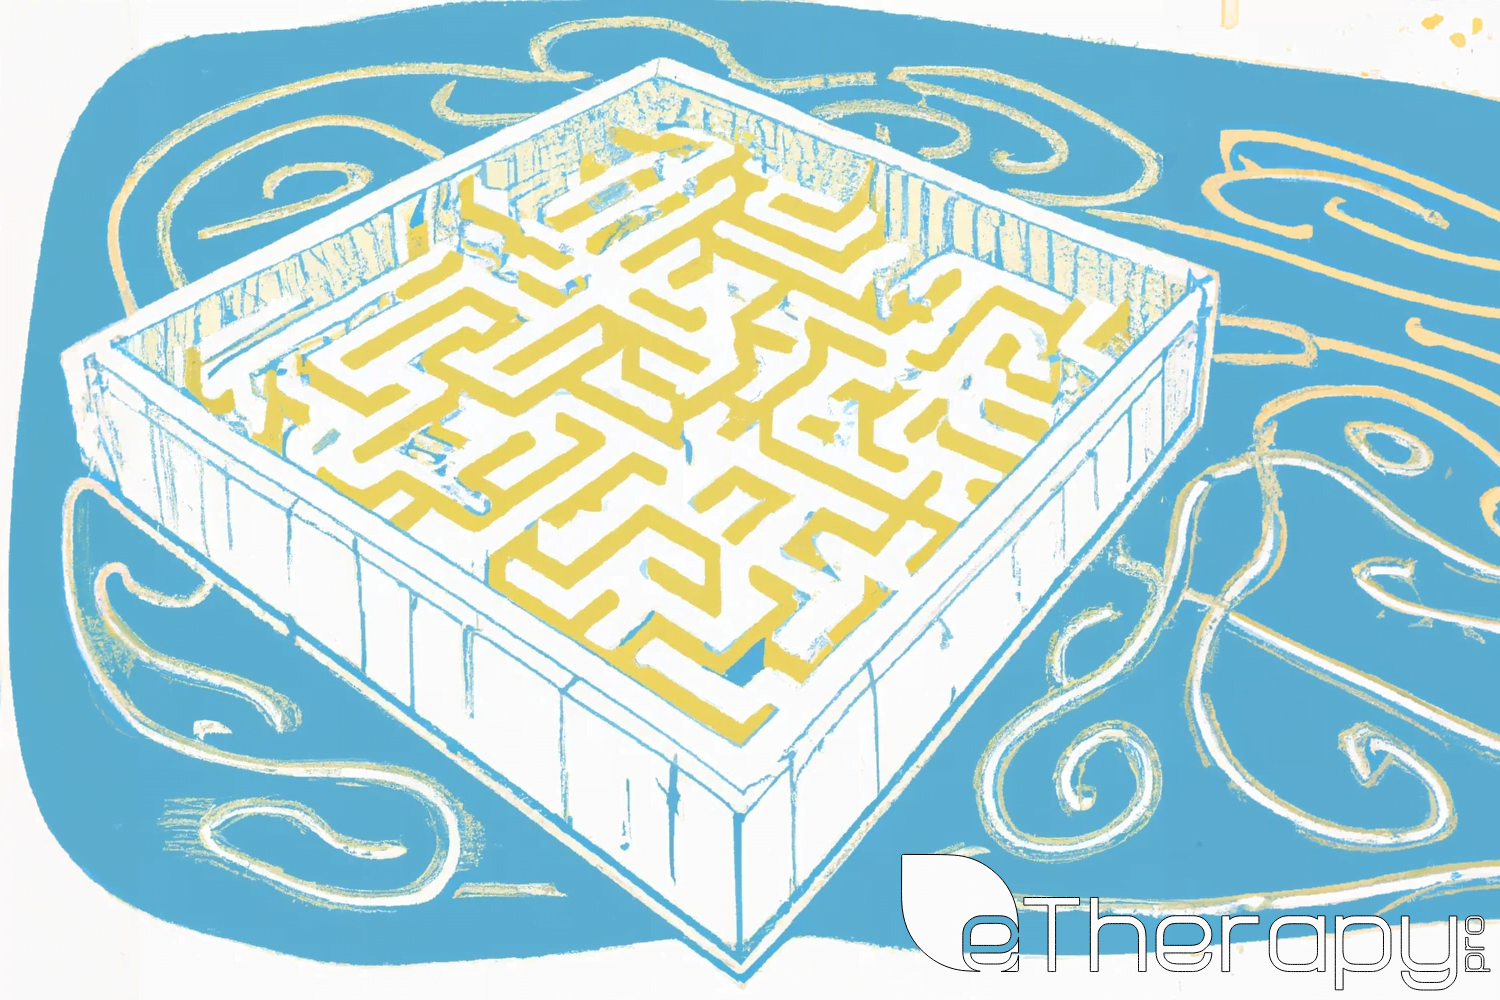 A sprawling maze, filled with shadows - Can We Overcome the Stigma of Mental Health